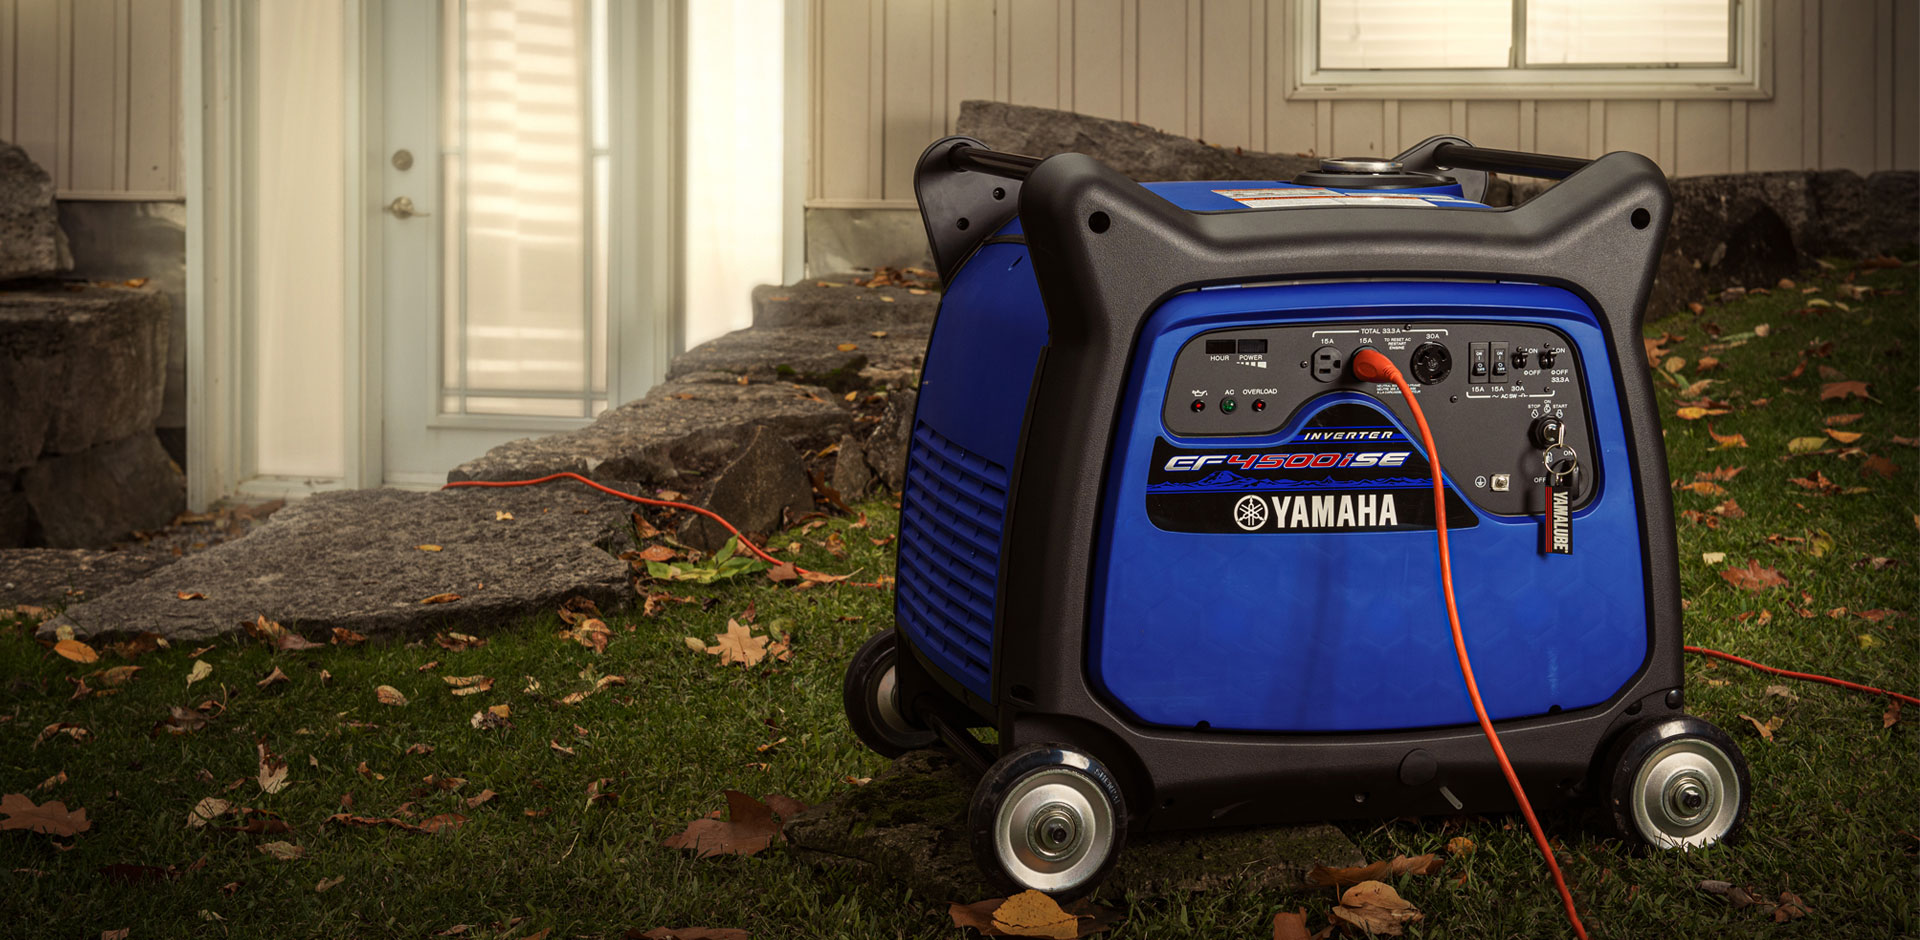 USING A PORTABLE GENERATOR FOR HOME BACKUP POWER